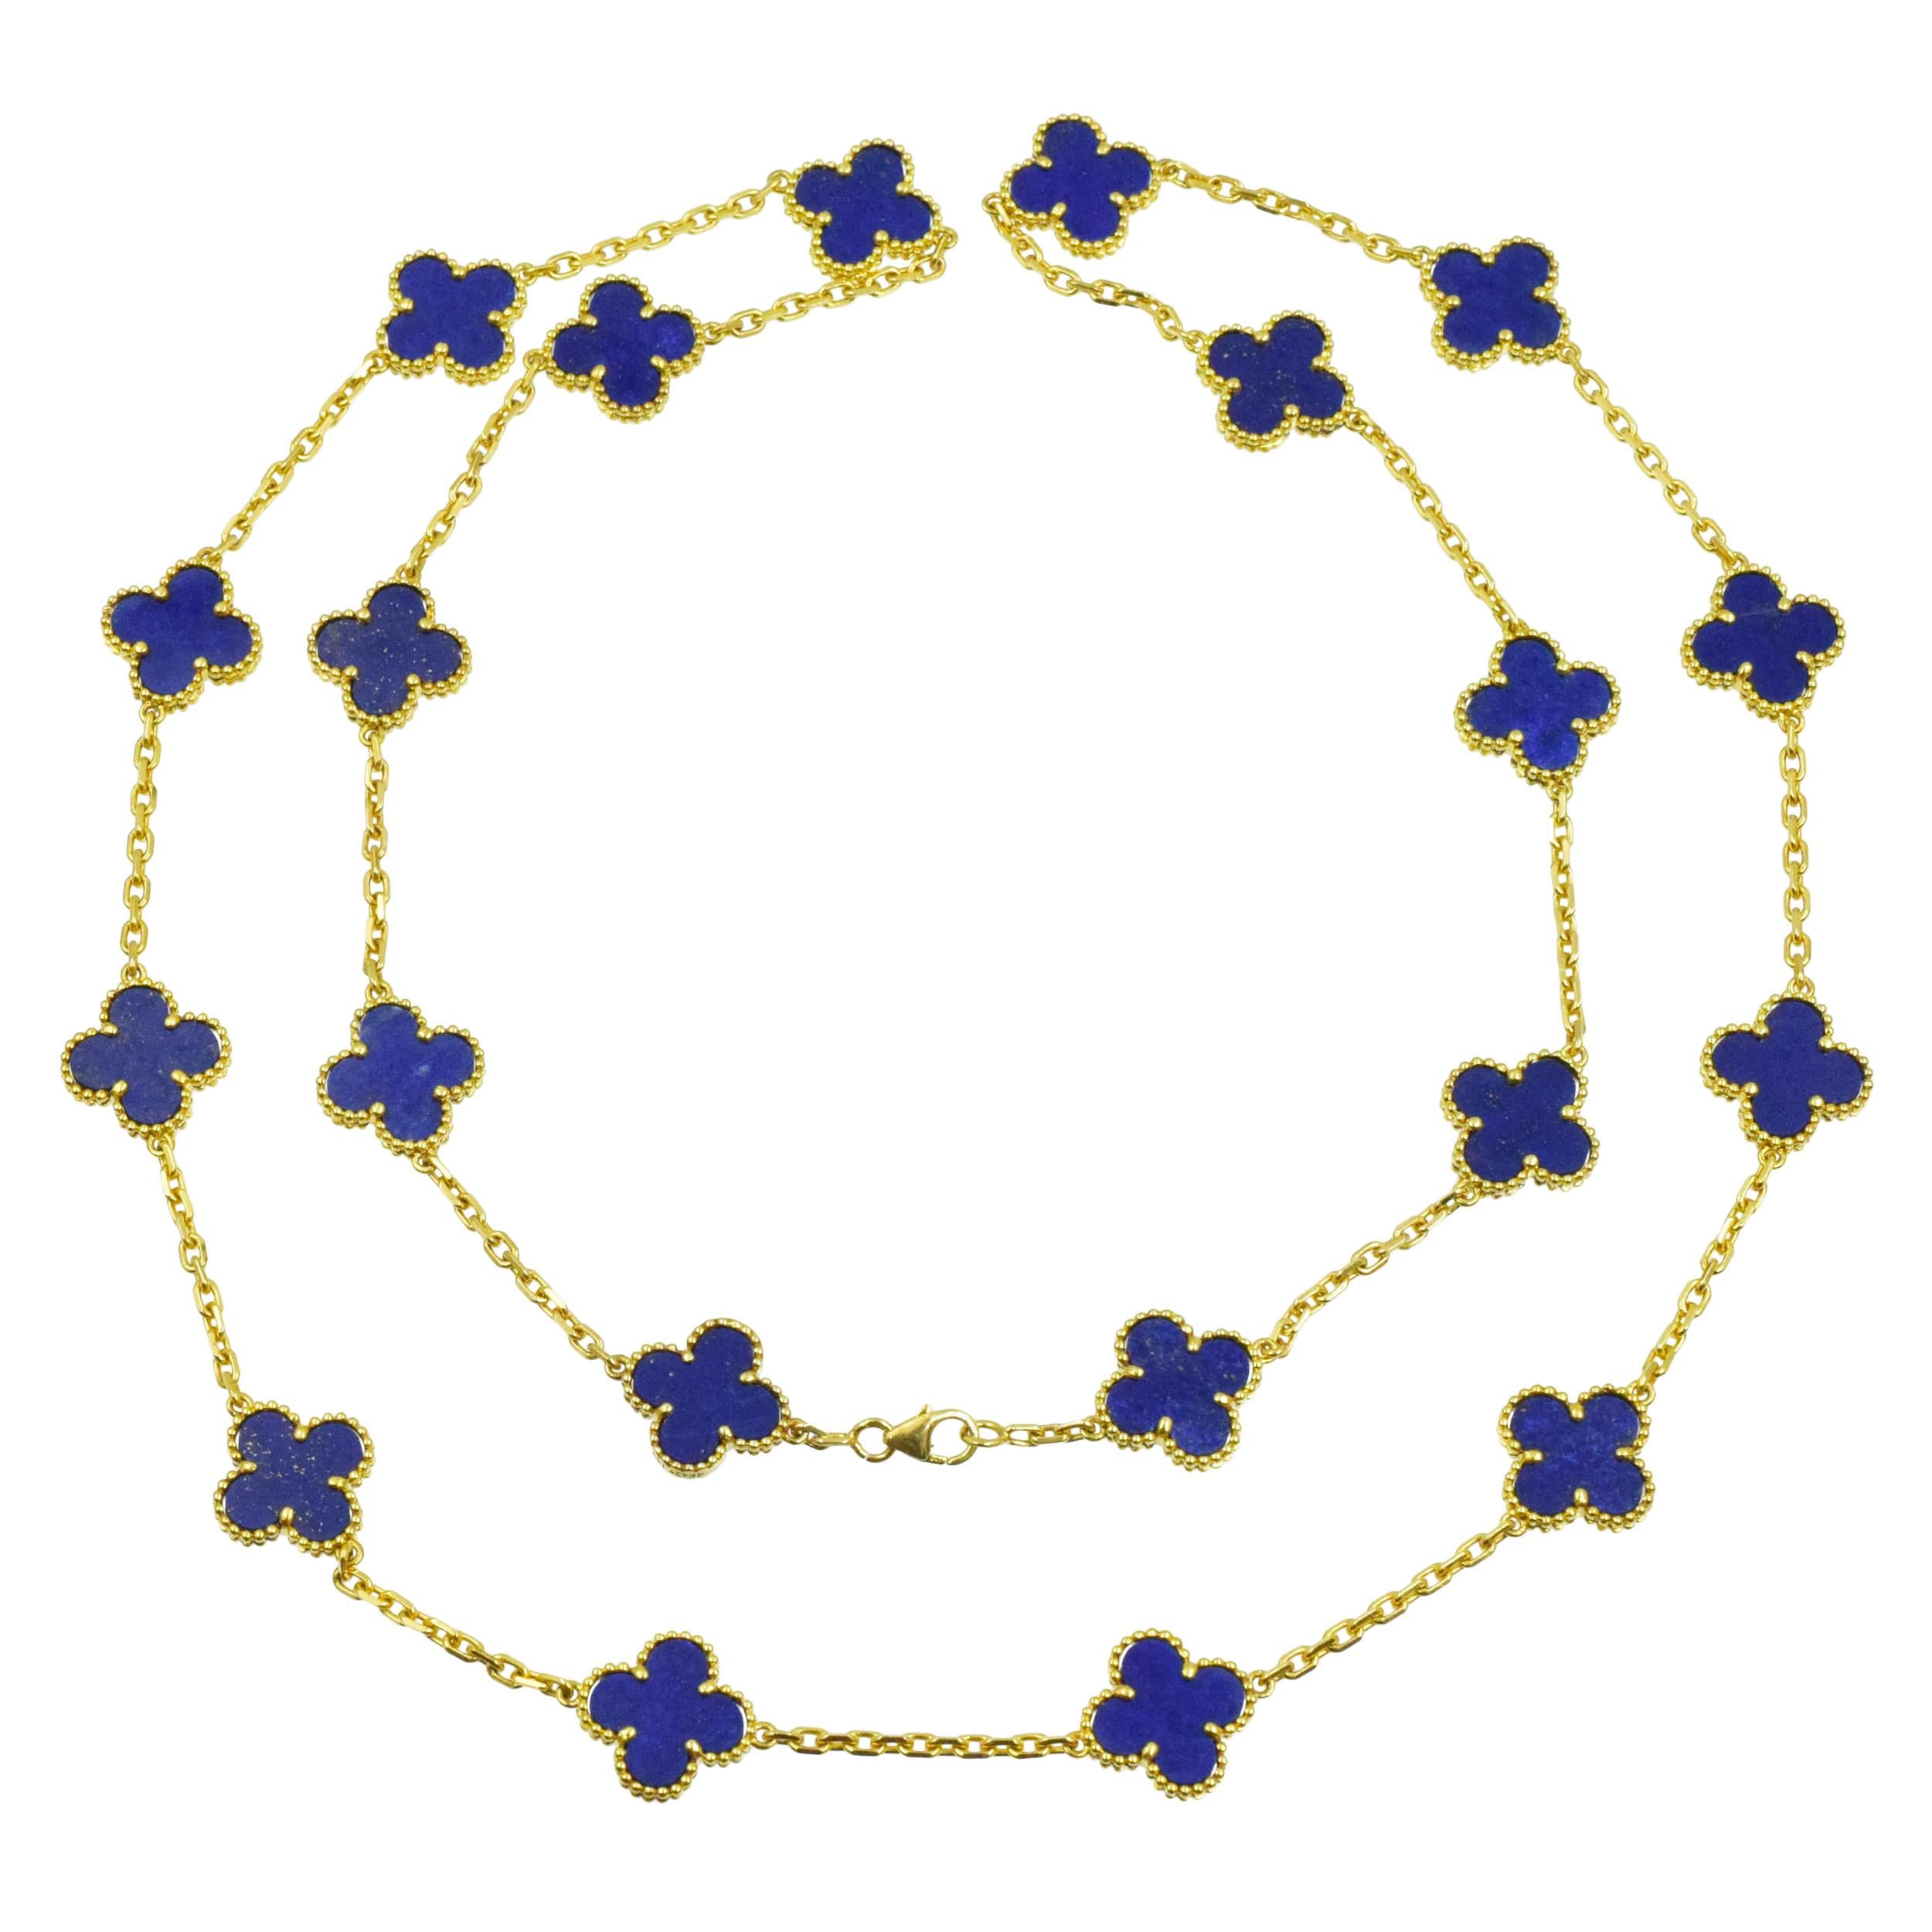 VCA Lapis Lazuli Vintage Alhambra Necklace in 18k
yellow gold. The necklace features 20 lapis lazuli clover motifs. Equipped with lobster clasp. Inscribed: VCA 750, 4K629.132. 
Stamped with french hallmarks and makers marks.
 Motif measurements: